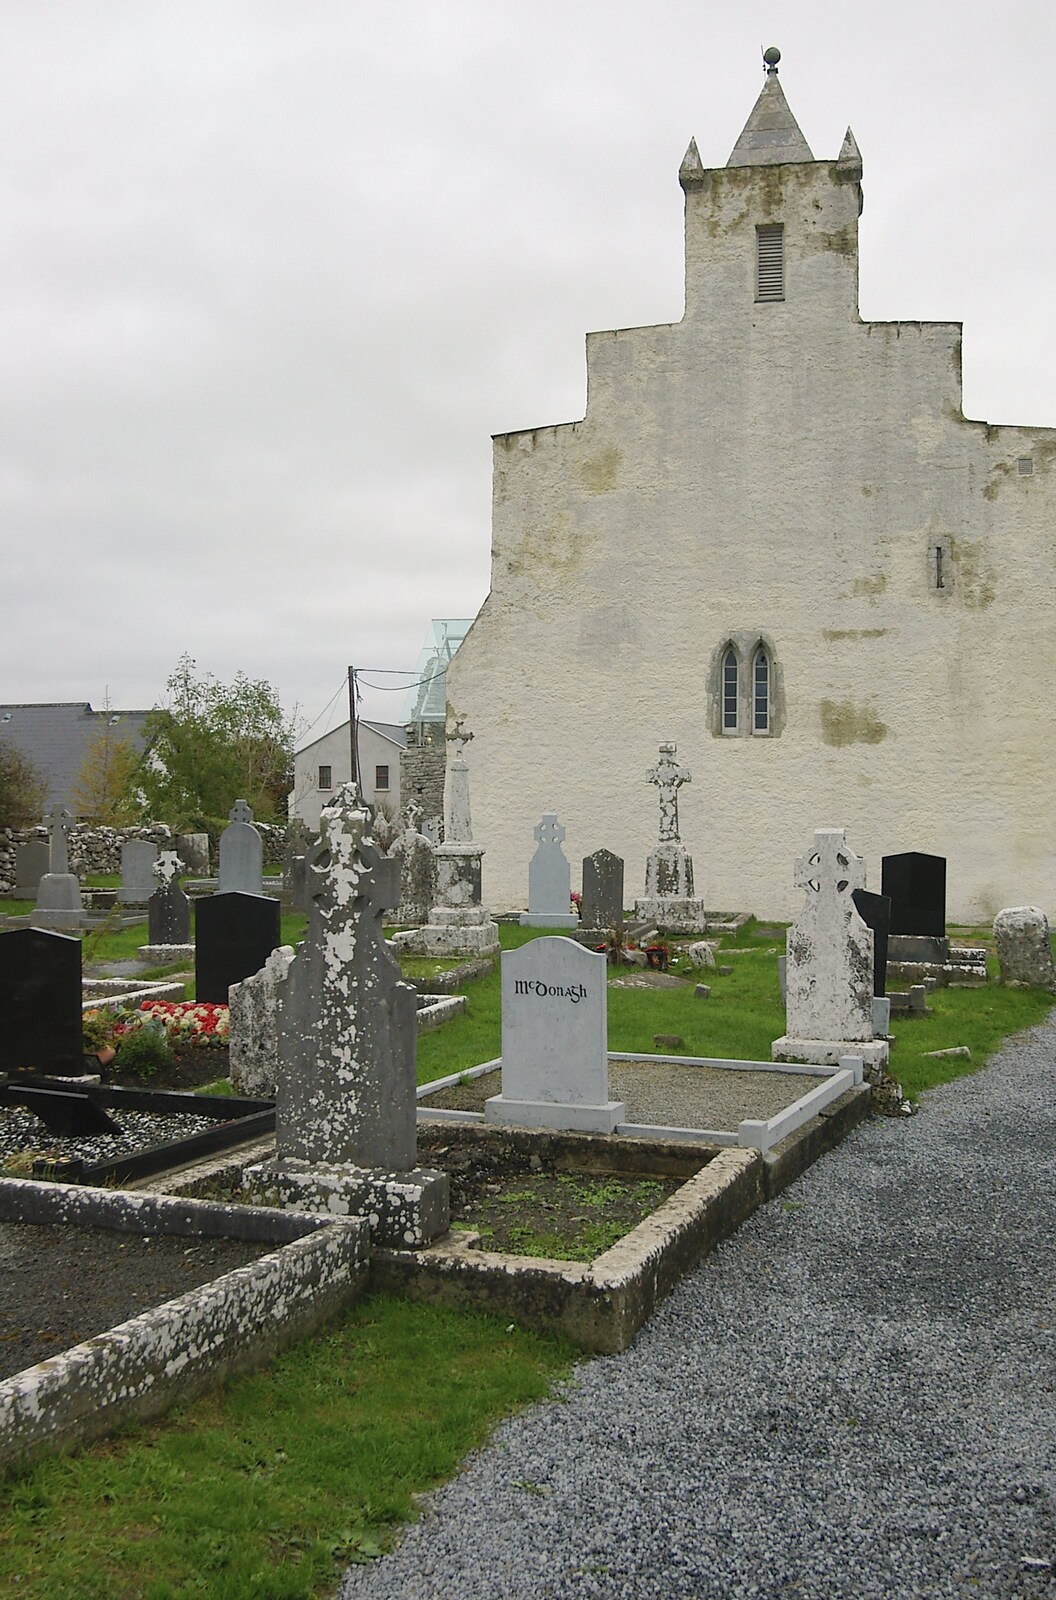 A graveyard from Corofin, Ennistymon and The Burran, County Clare, Western Ireland - 27th October 2006